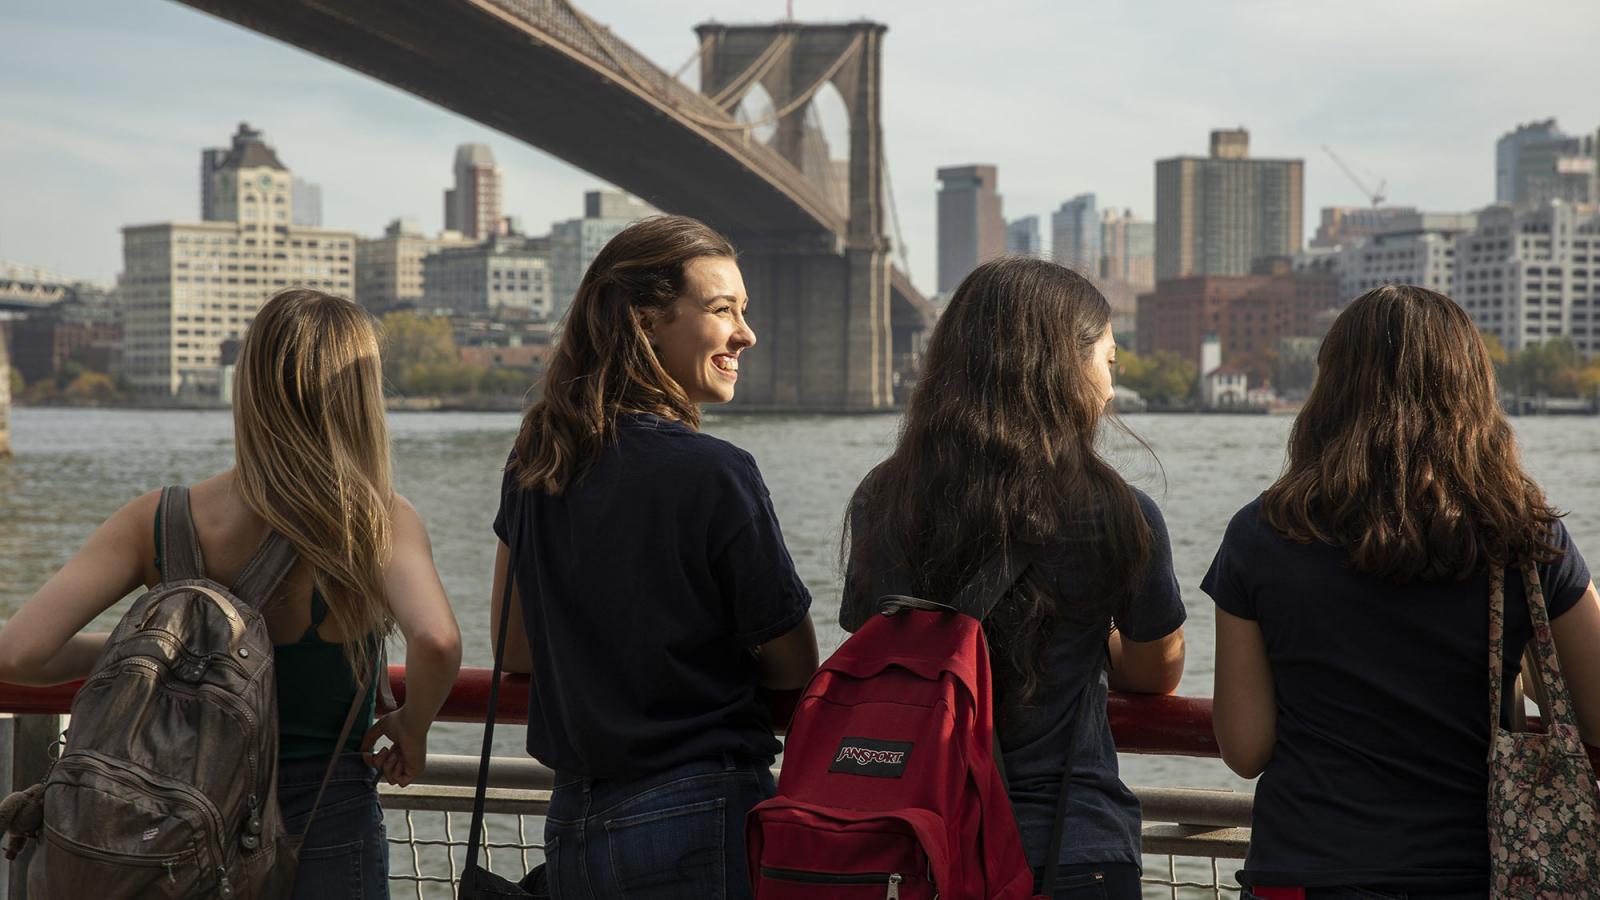 Pace students standing underneath the Brooklyn Bridge